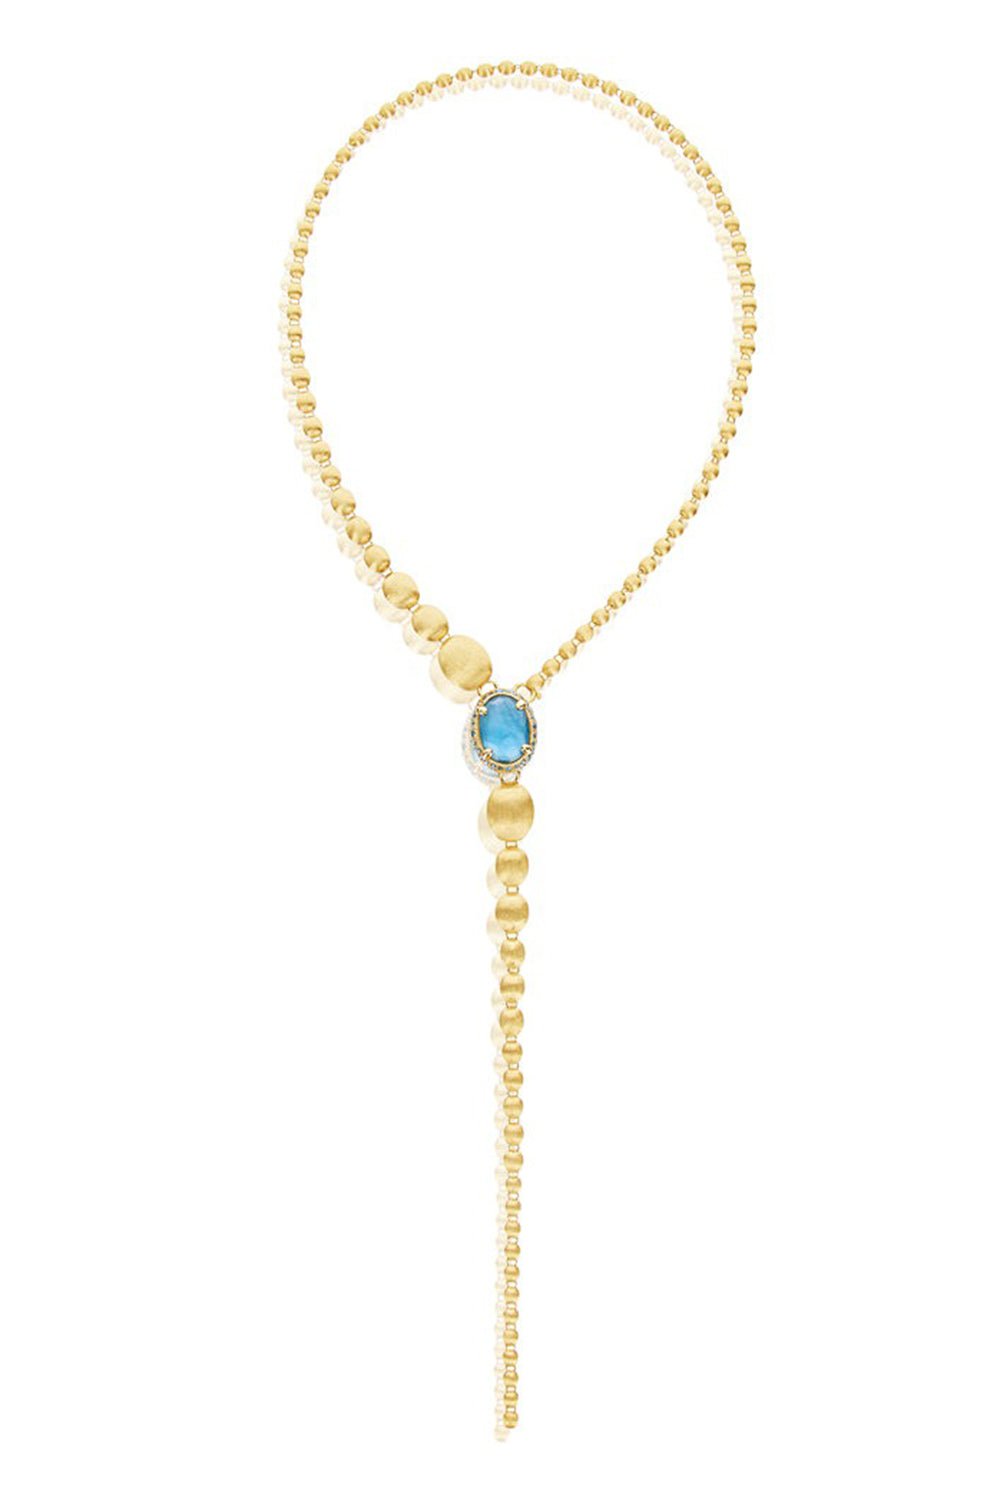 NANIS-Reverse Convertible Y Necklace-YELLOW GOLD